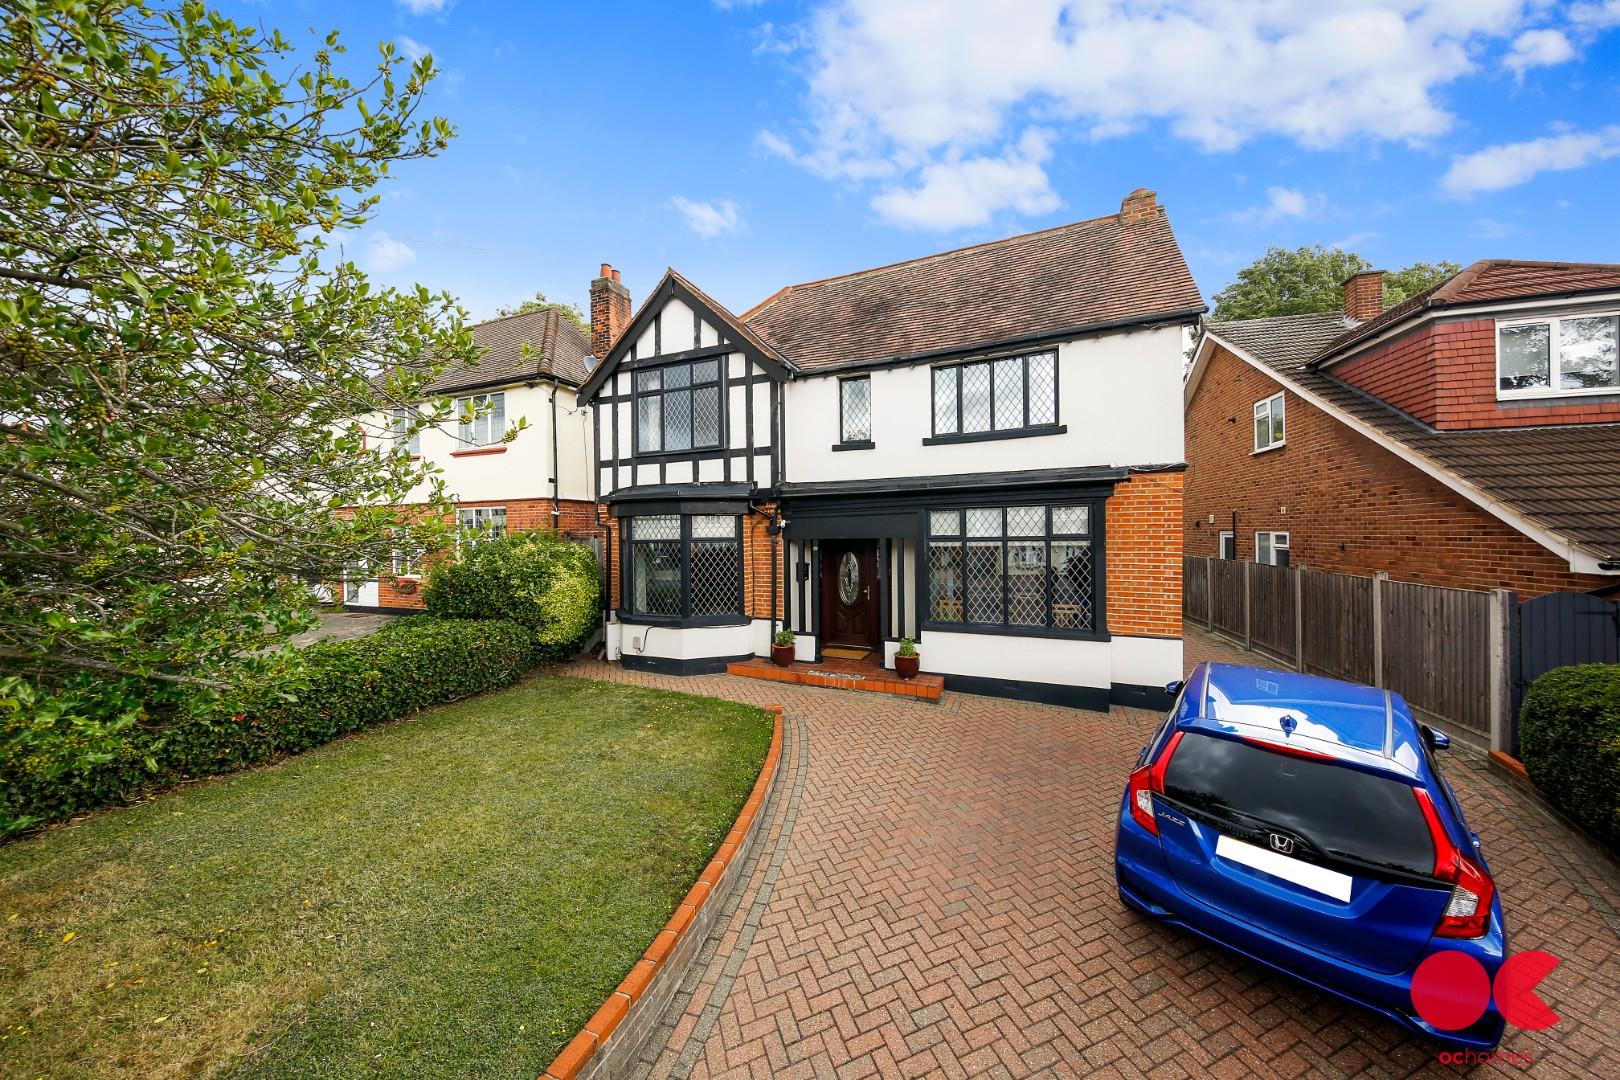 4 bed detached house for sale in Slewins Lane, Hornchurch  - Property Image 1